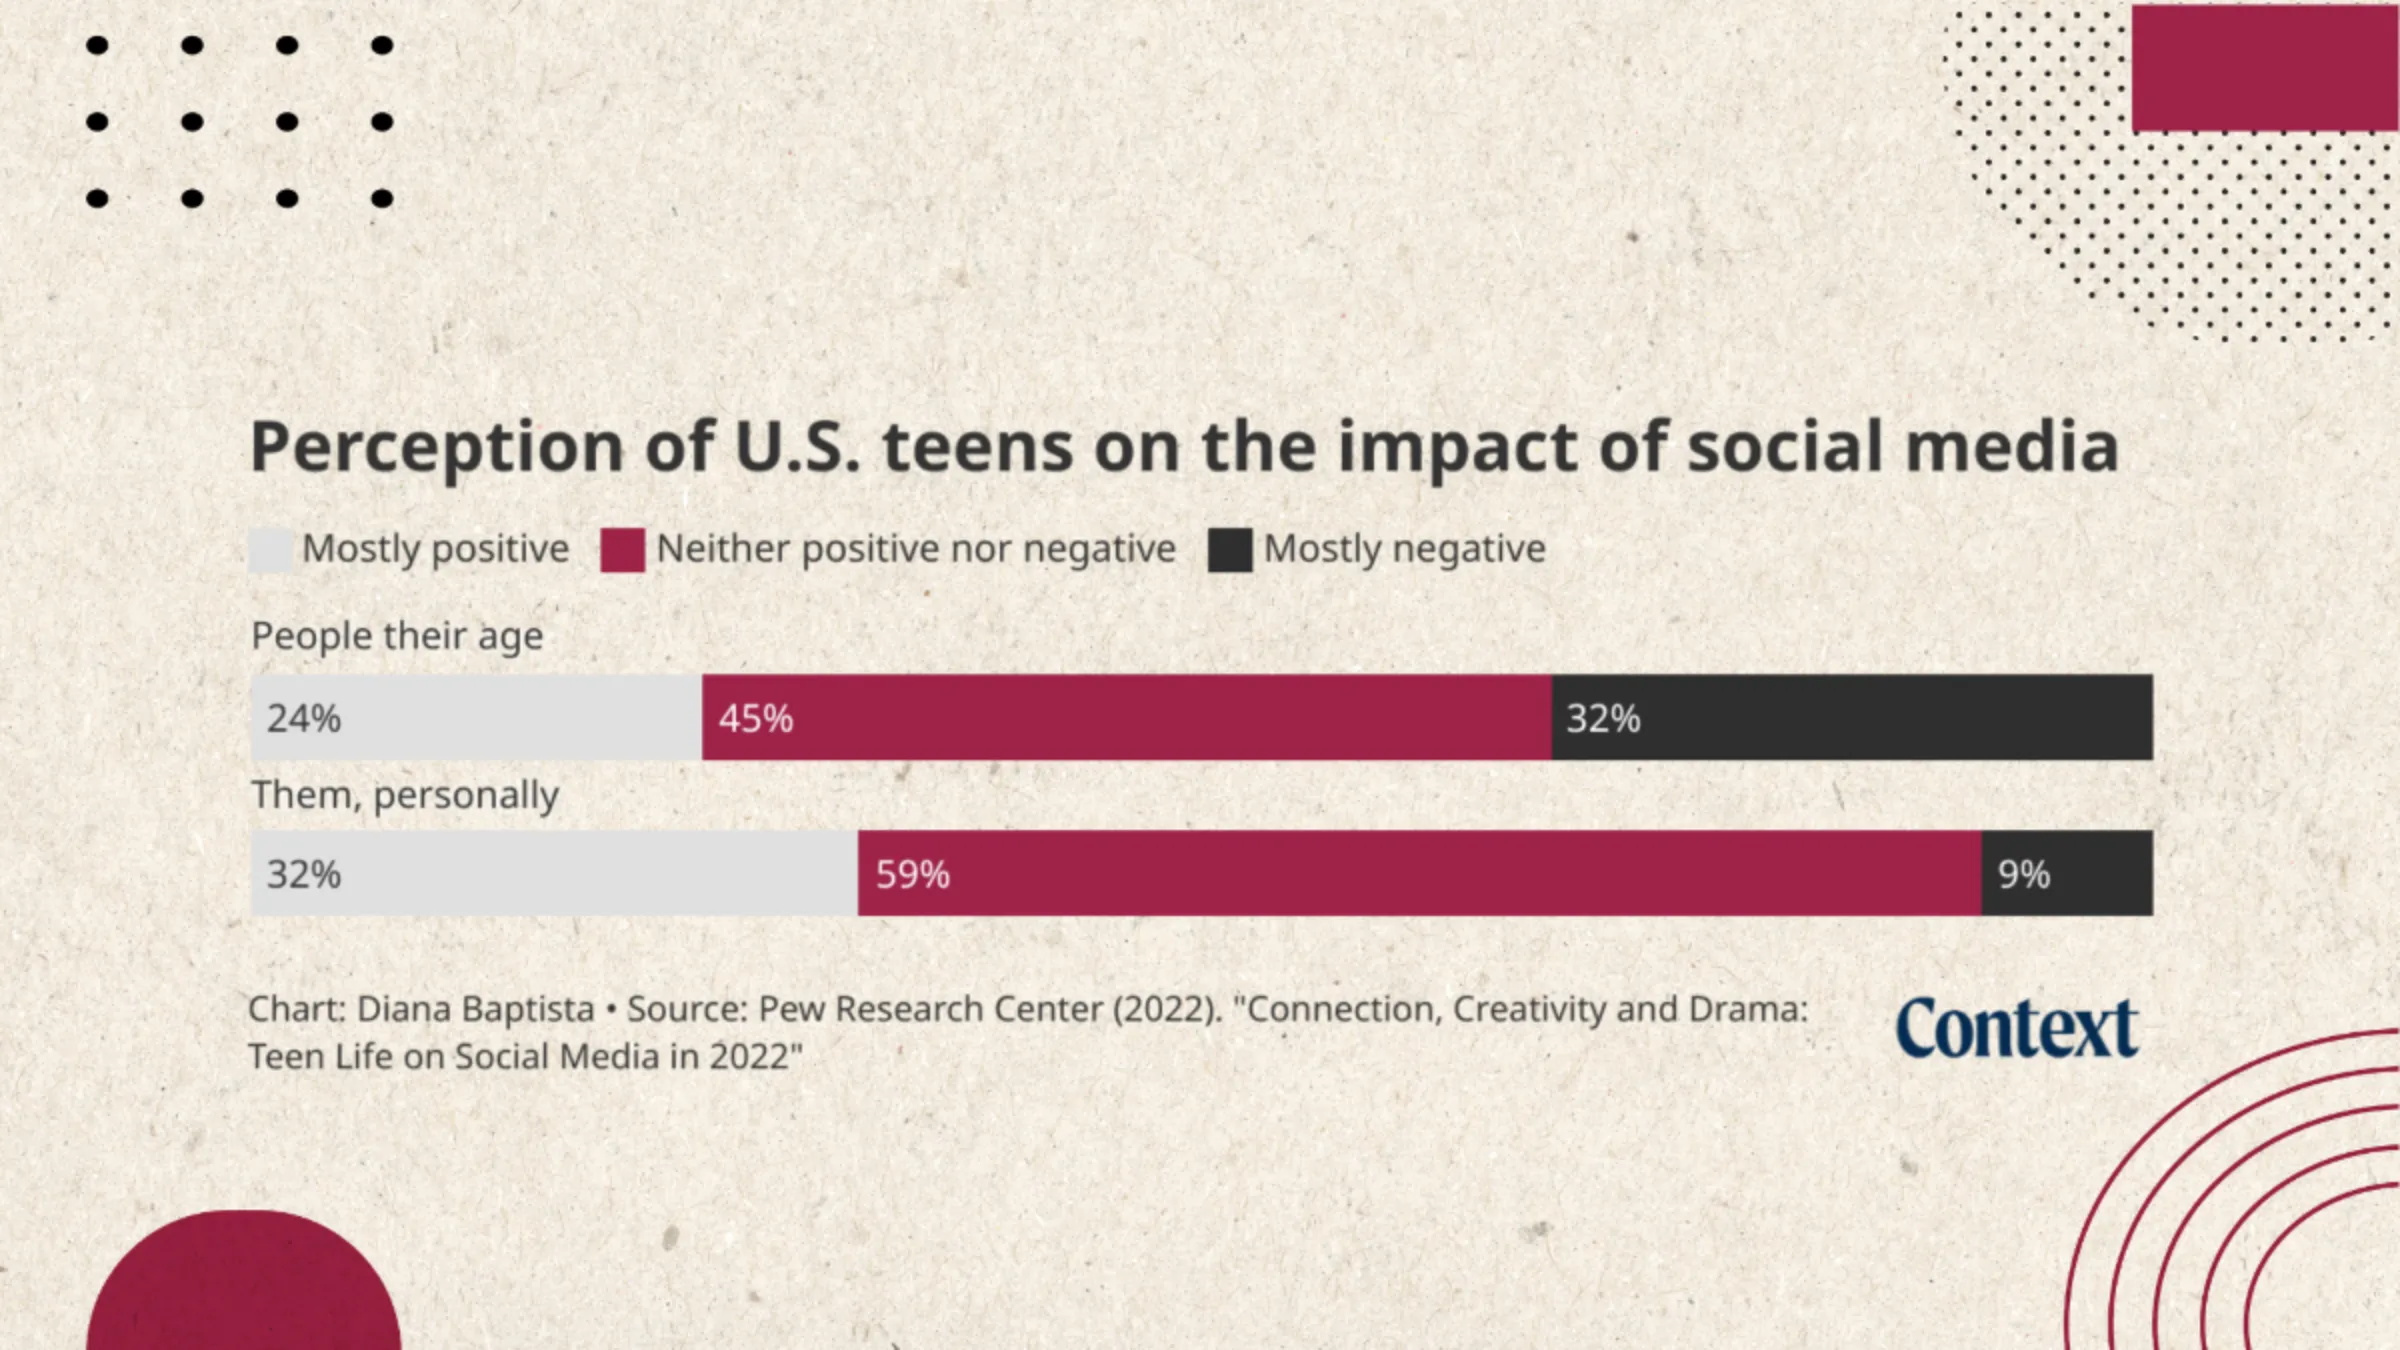 A bar chart labelled 'Perception of U.S. teens on the impact of social media'. The chart shows two bars, one for People their age and another for Them, personally. The charts are measured on a scale with Mostly positive, Neither positive nor negative, and Mostly negative. The chart data is as follows from most to least positive. 
People their age: 24%, 45%, 32%
Them, personally: 32%, 59%, 9%
Chart: Thomson Reuters Foundation/Diana Baptista. Source: Pew Research Center (2022). 'Connection, Creativity and Drama: Teen Life on Social Media in 2022'.